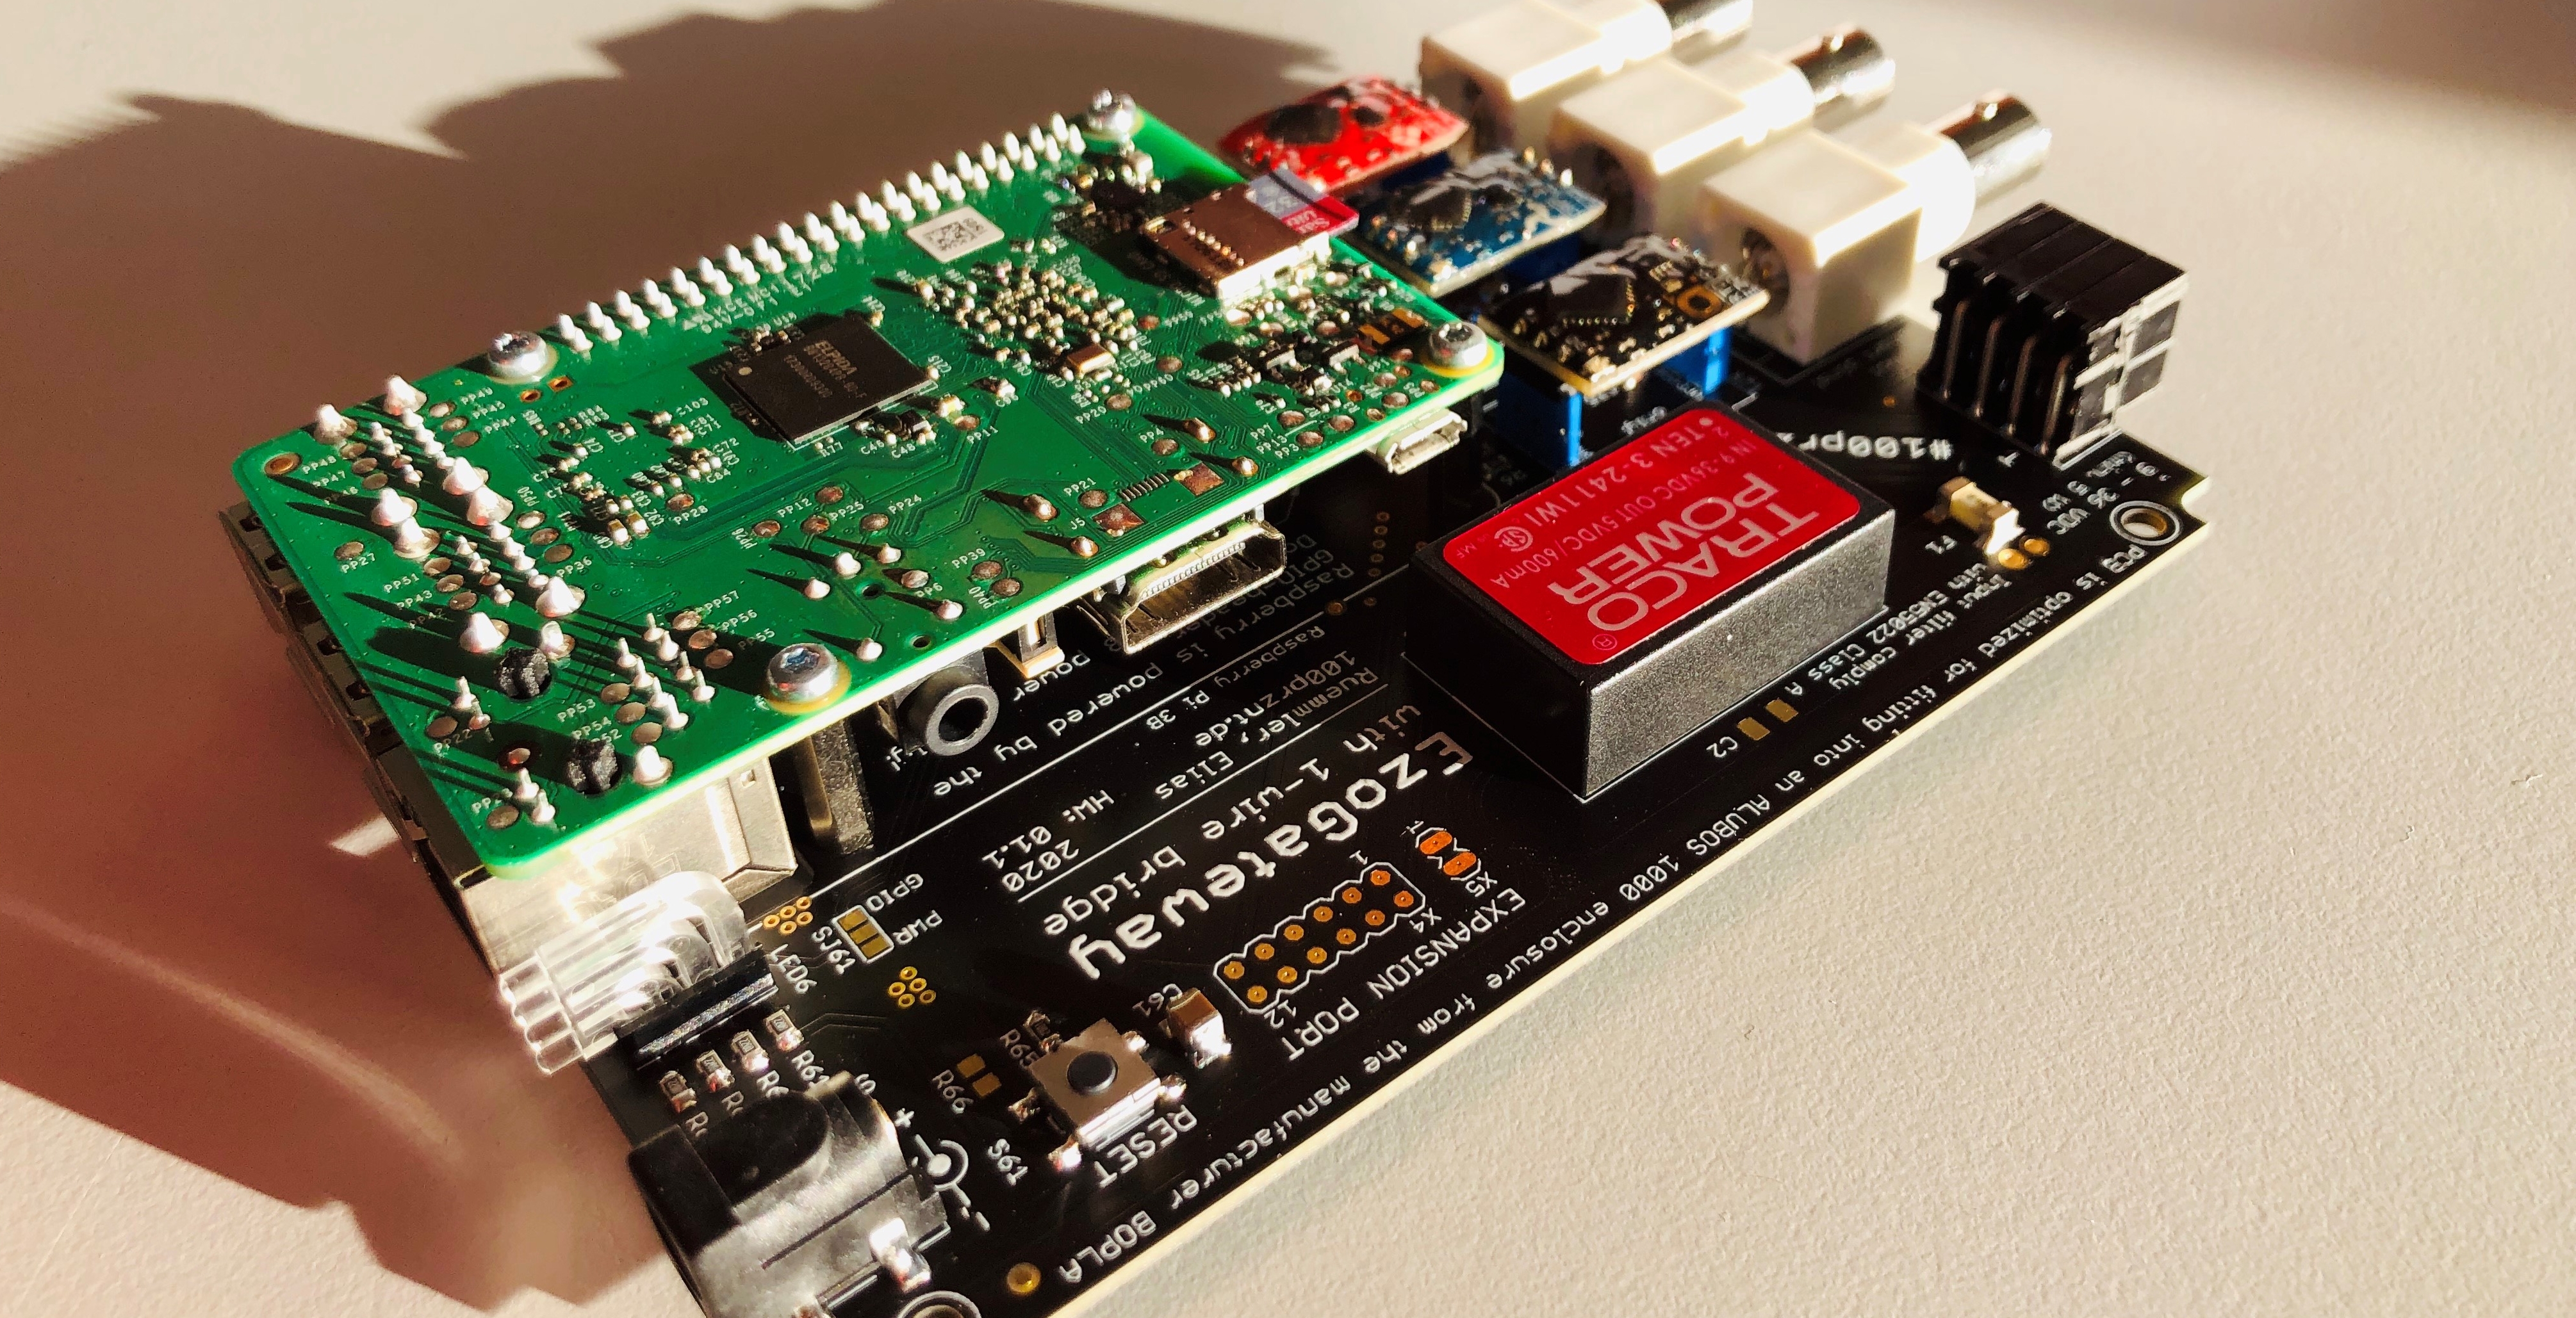 EzoGateway PCB equipped with RaspberryPi and EZO™ devices (pH, ORP and RTD)